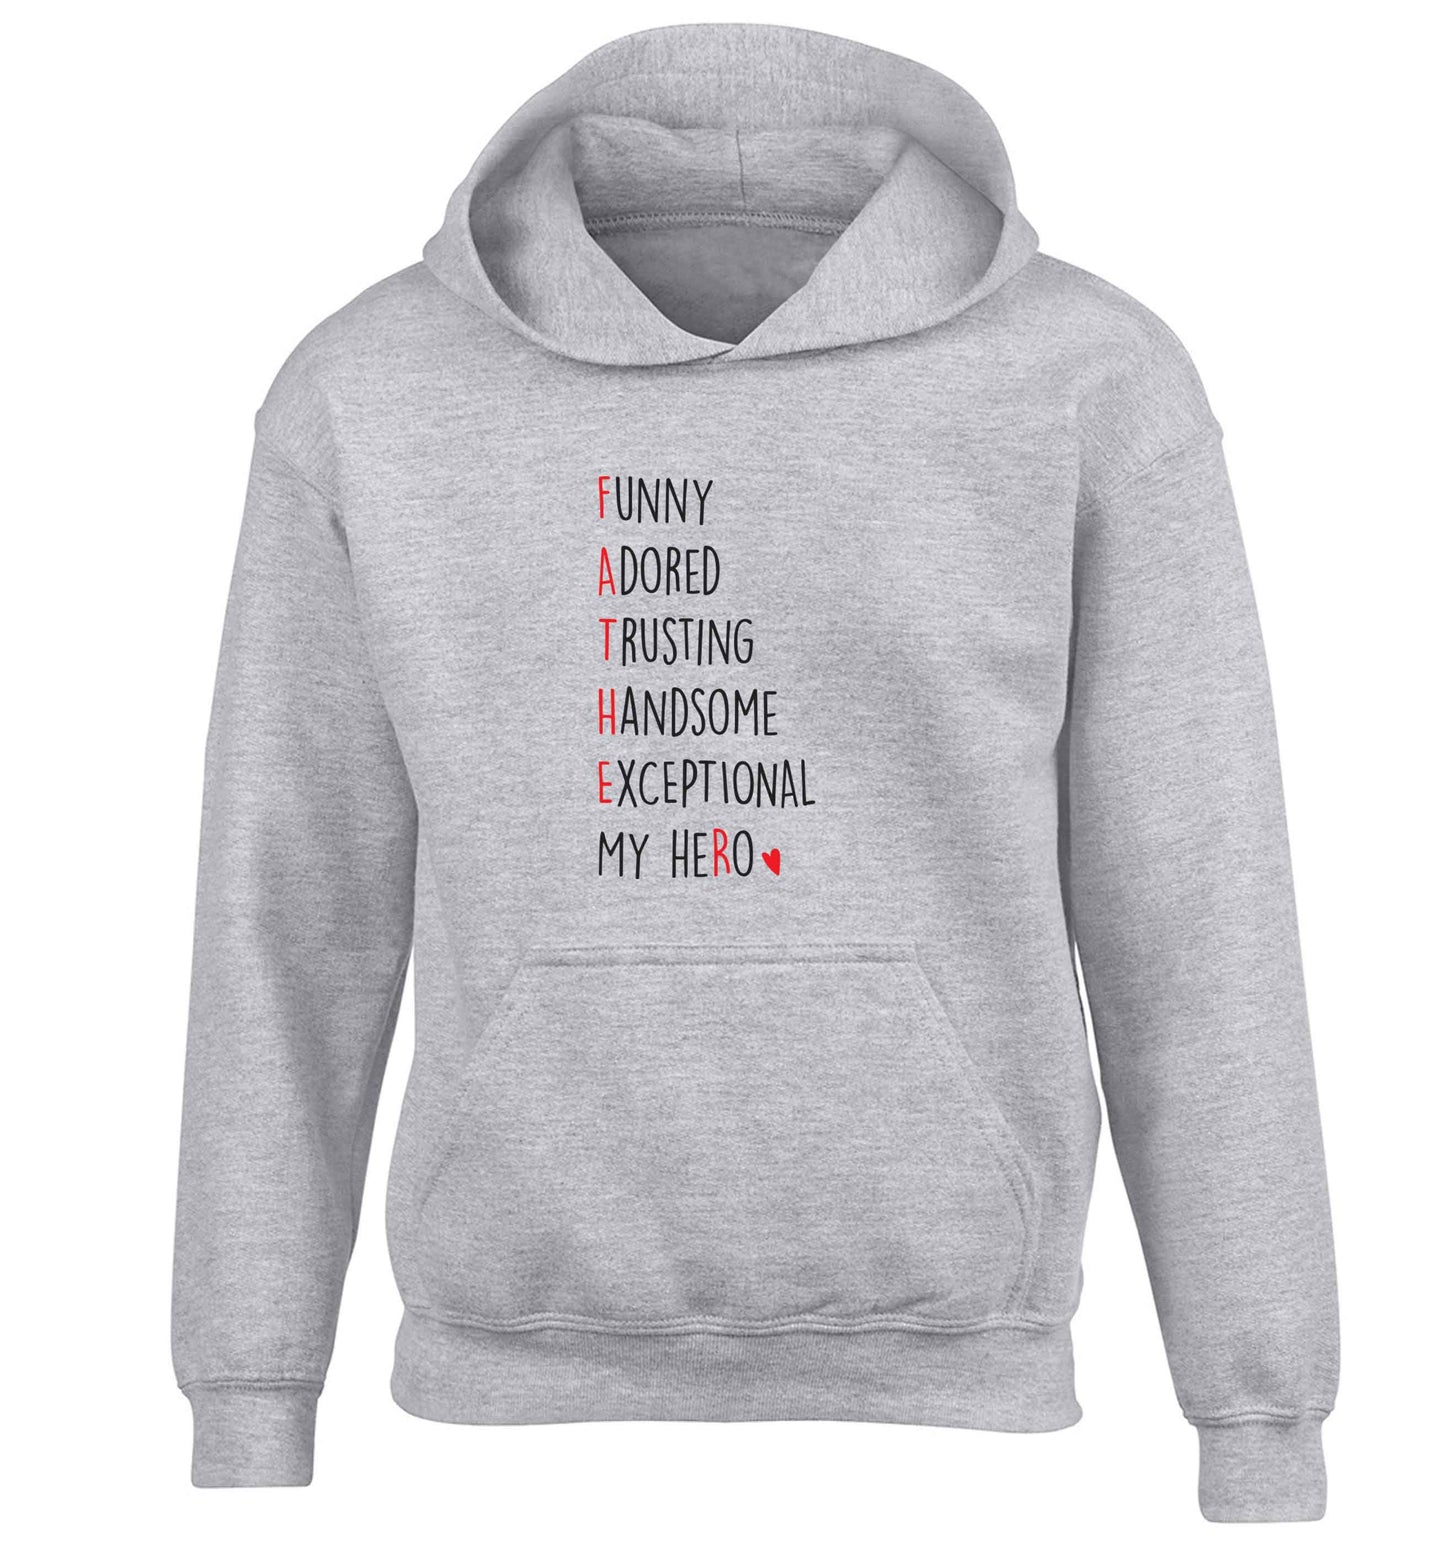 Father, funny adored trusting handsome exceptional my hero children's grey hoodie 12-13 Years